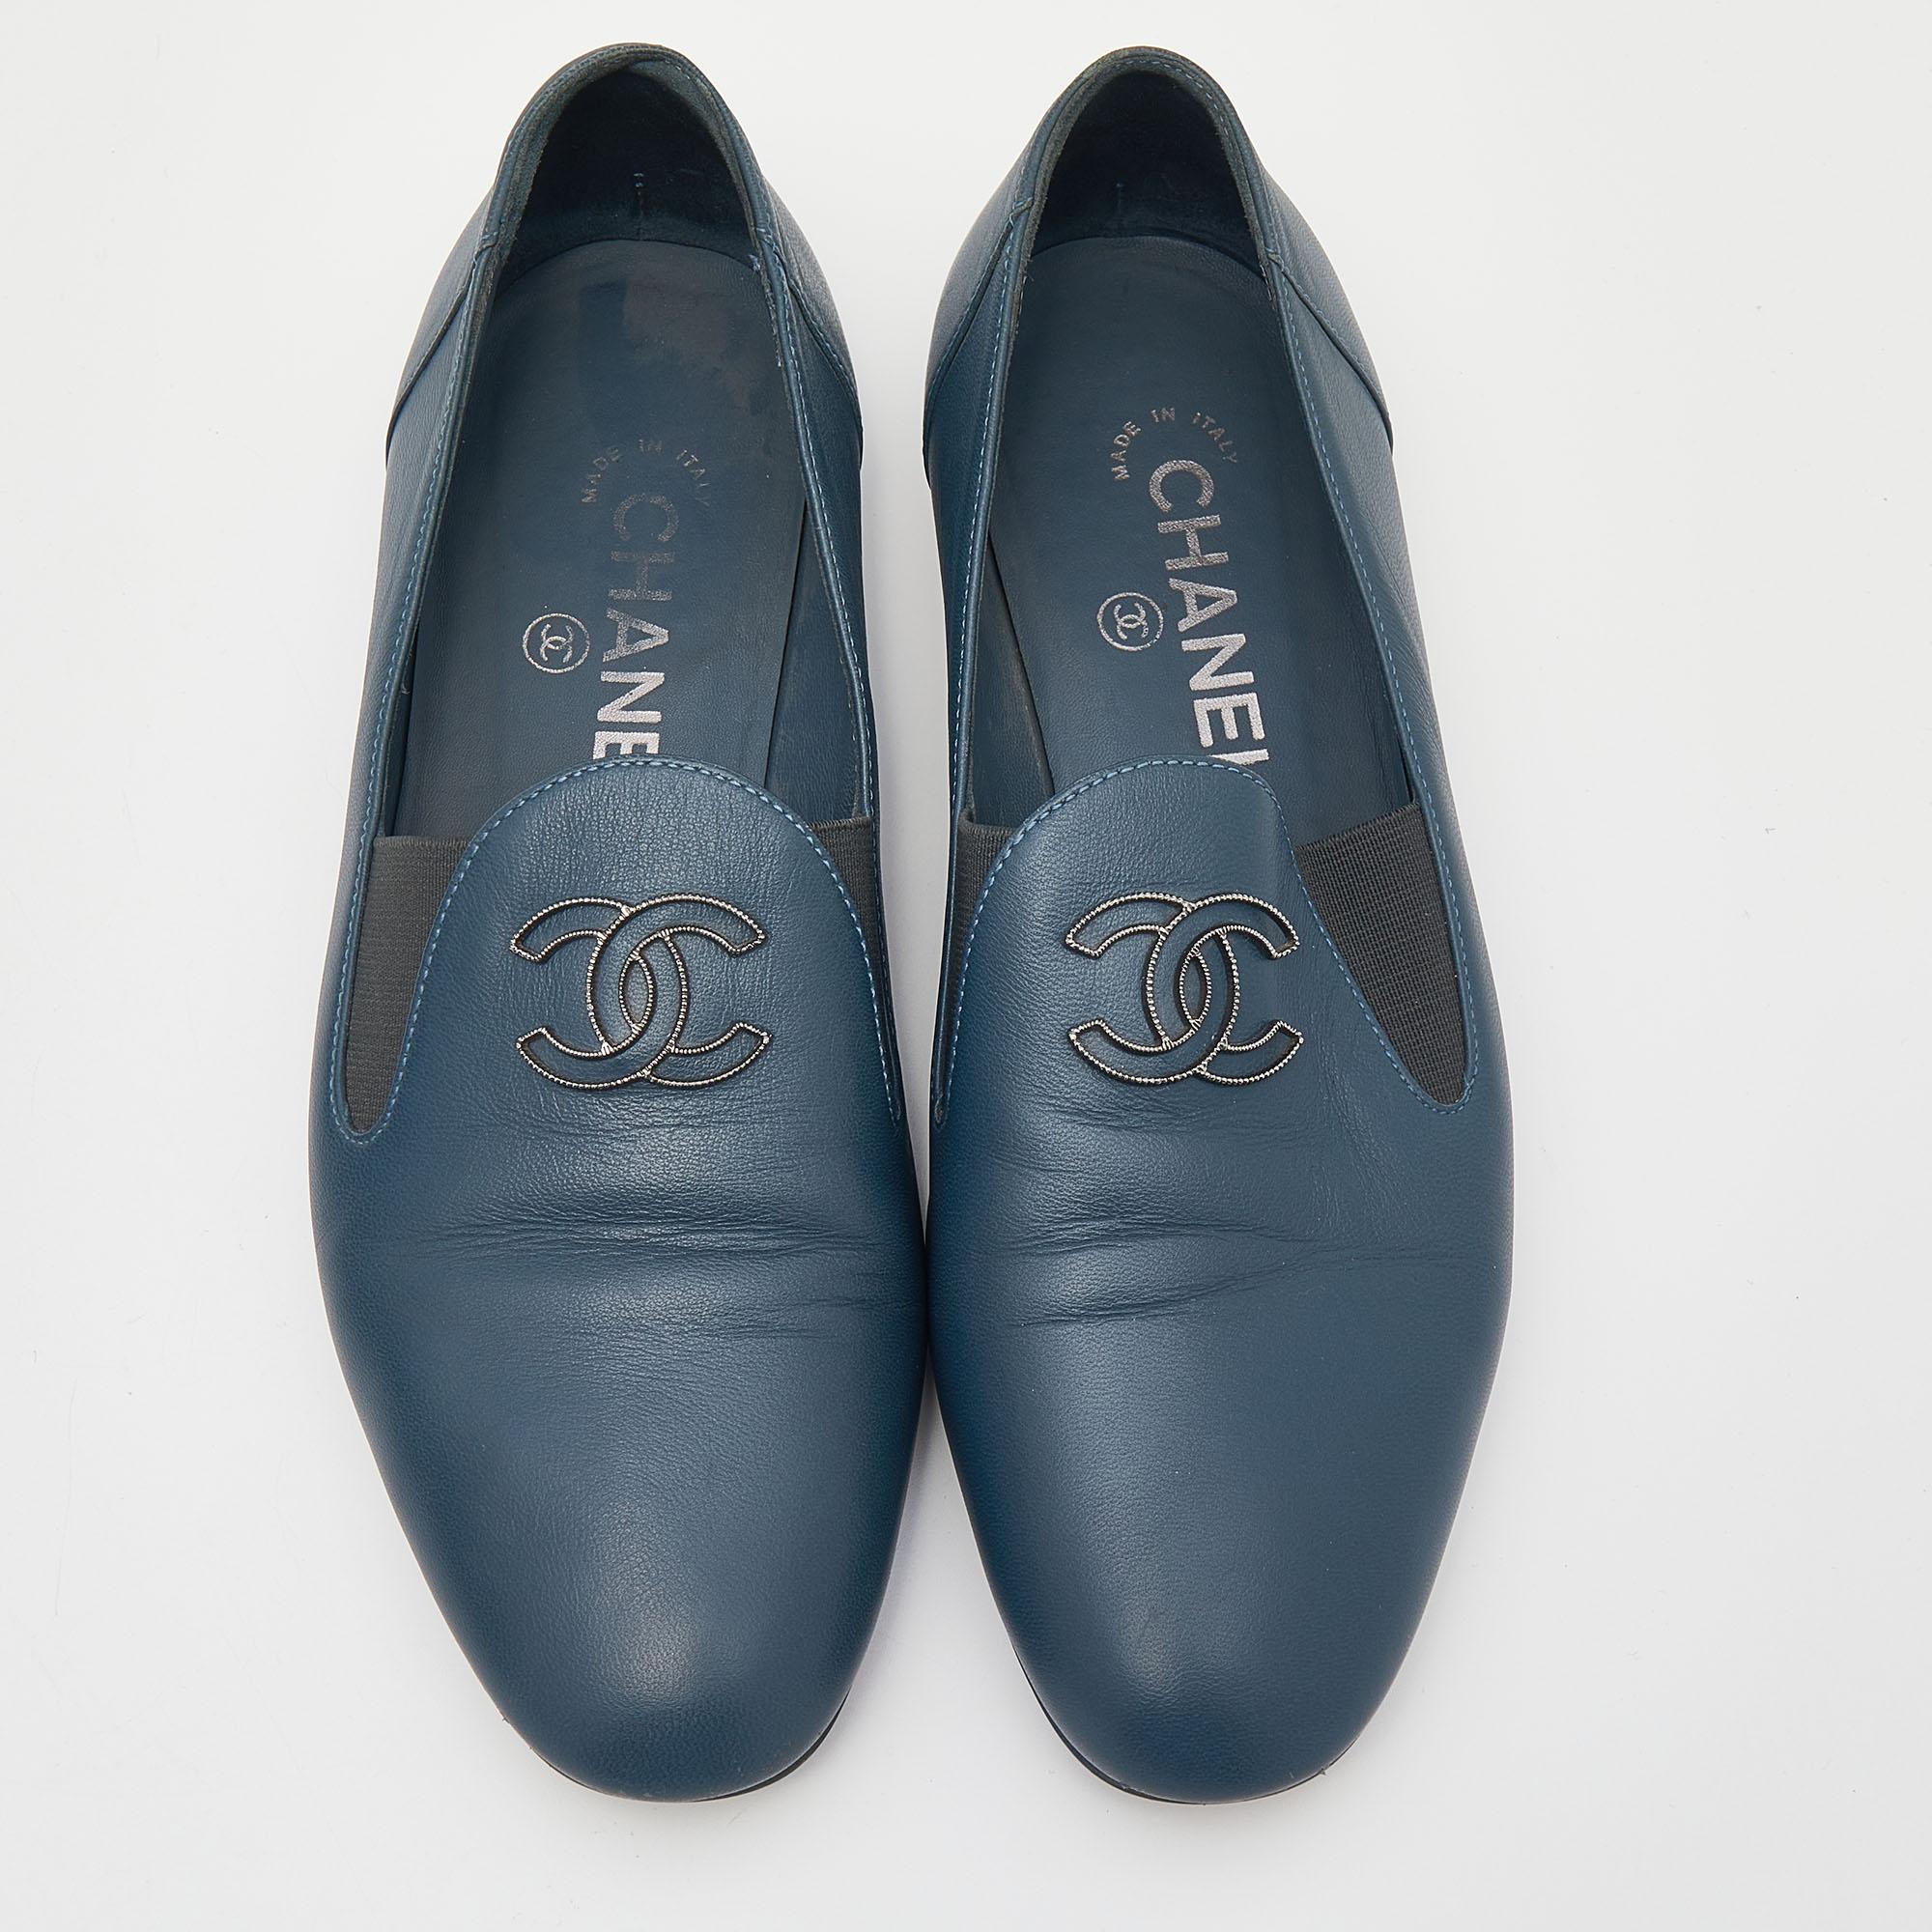 Exquisite and well-crafted, these CC Chanel loafers are worth owning. They have been crafted using the best of materials and they come flaunting a grand shade. The loafers are ideal to wear all day.

Includes: Original Dustbag, Original Box